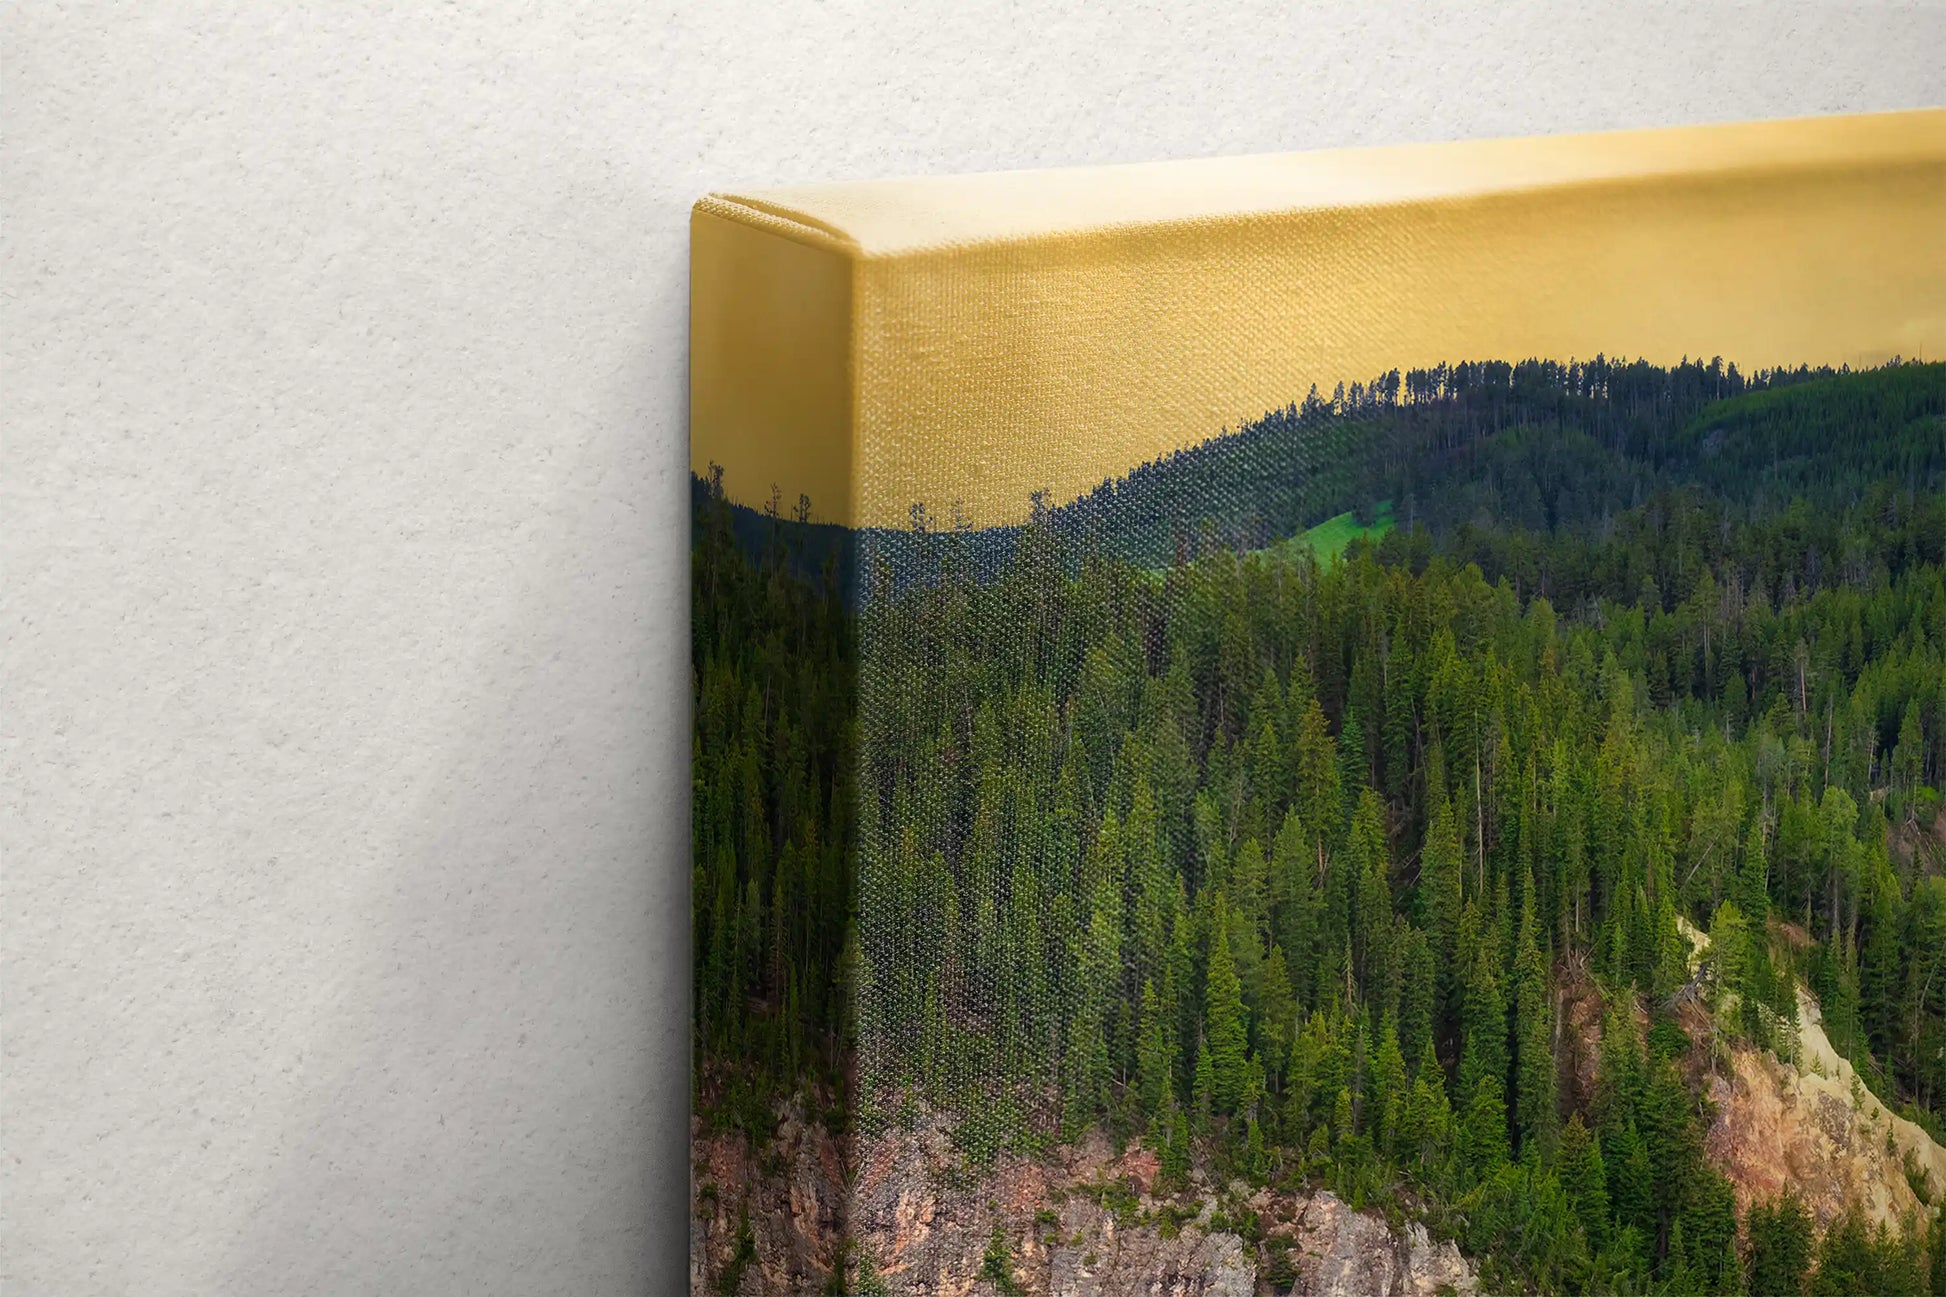 Edge view of a canvas print featuring the golden-hued top border that complements the verdant forest of Lower Yellowstone Falls, capturing the vibrant essence of Yellowstone.